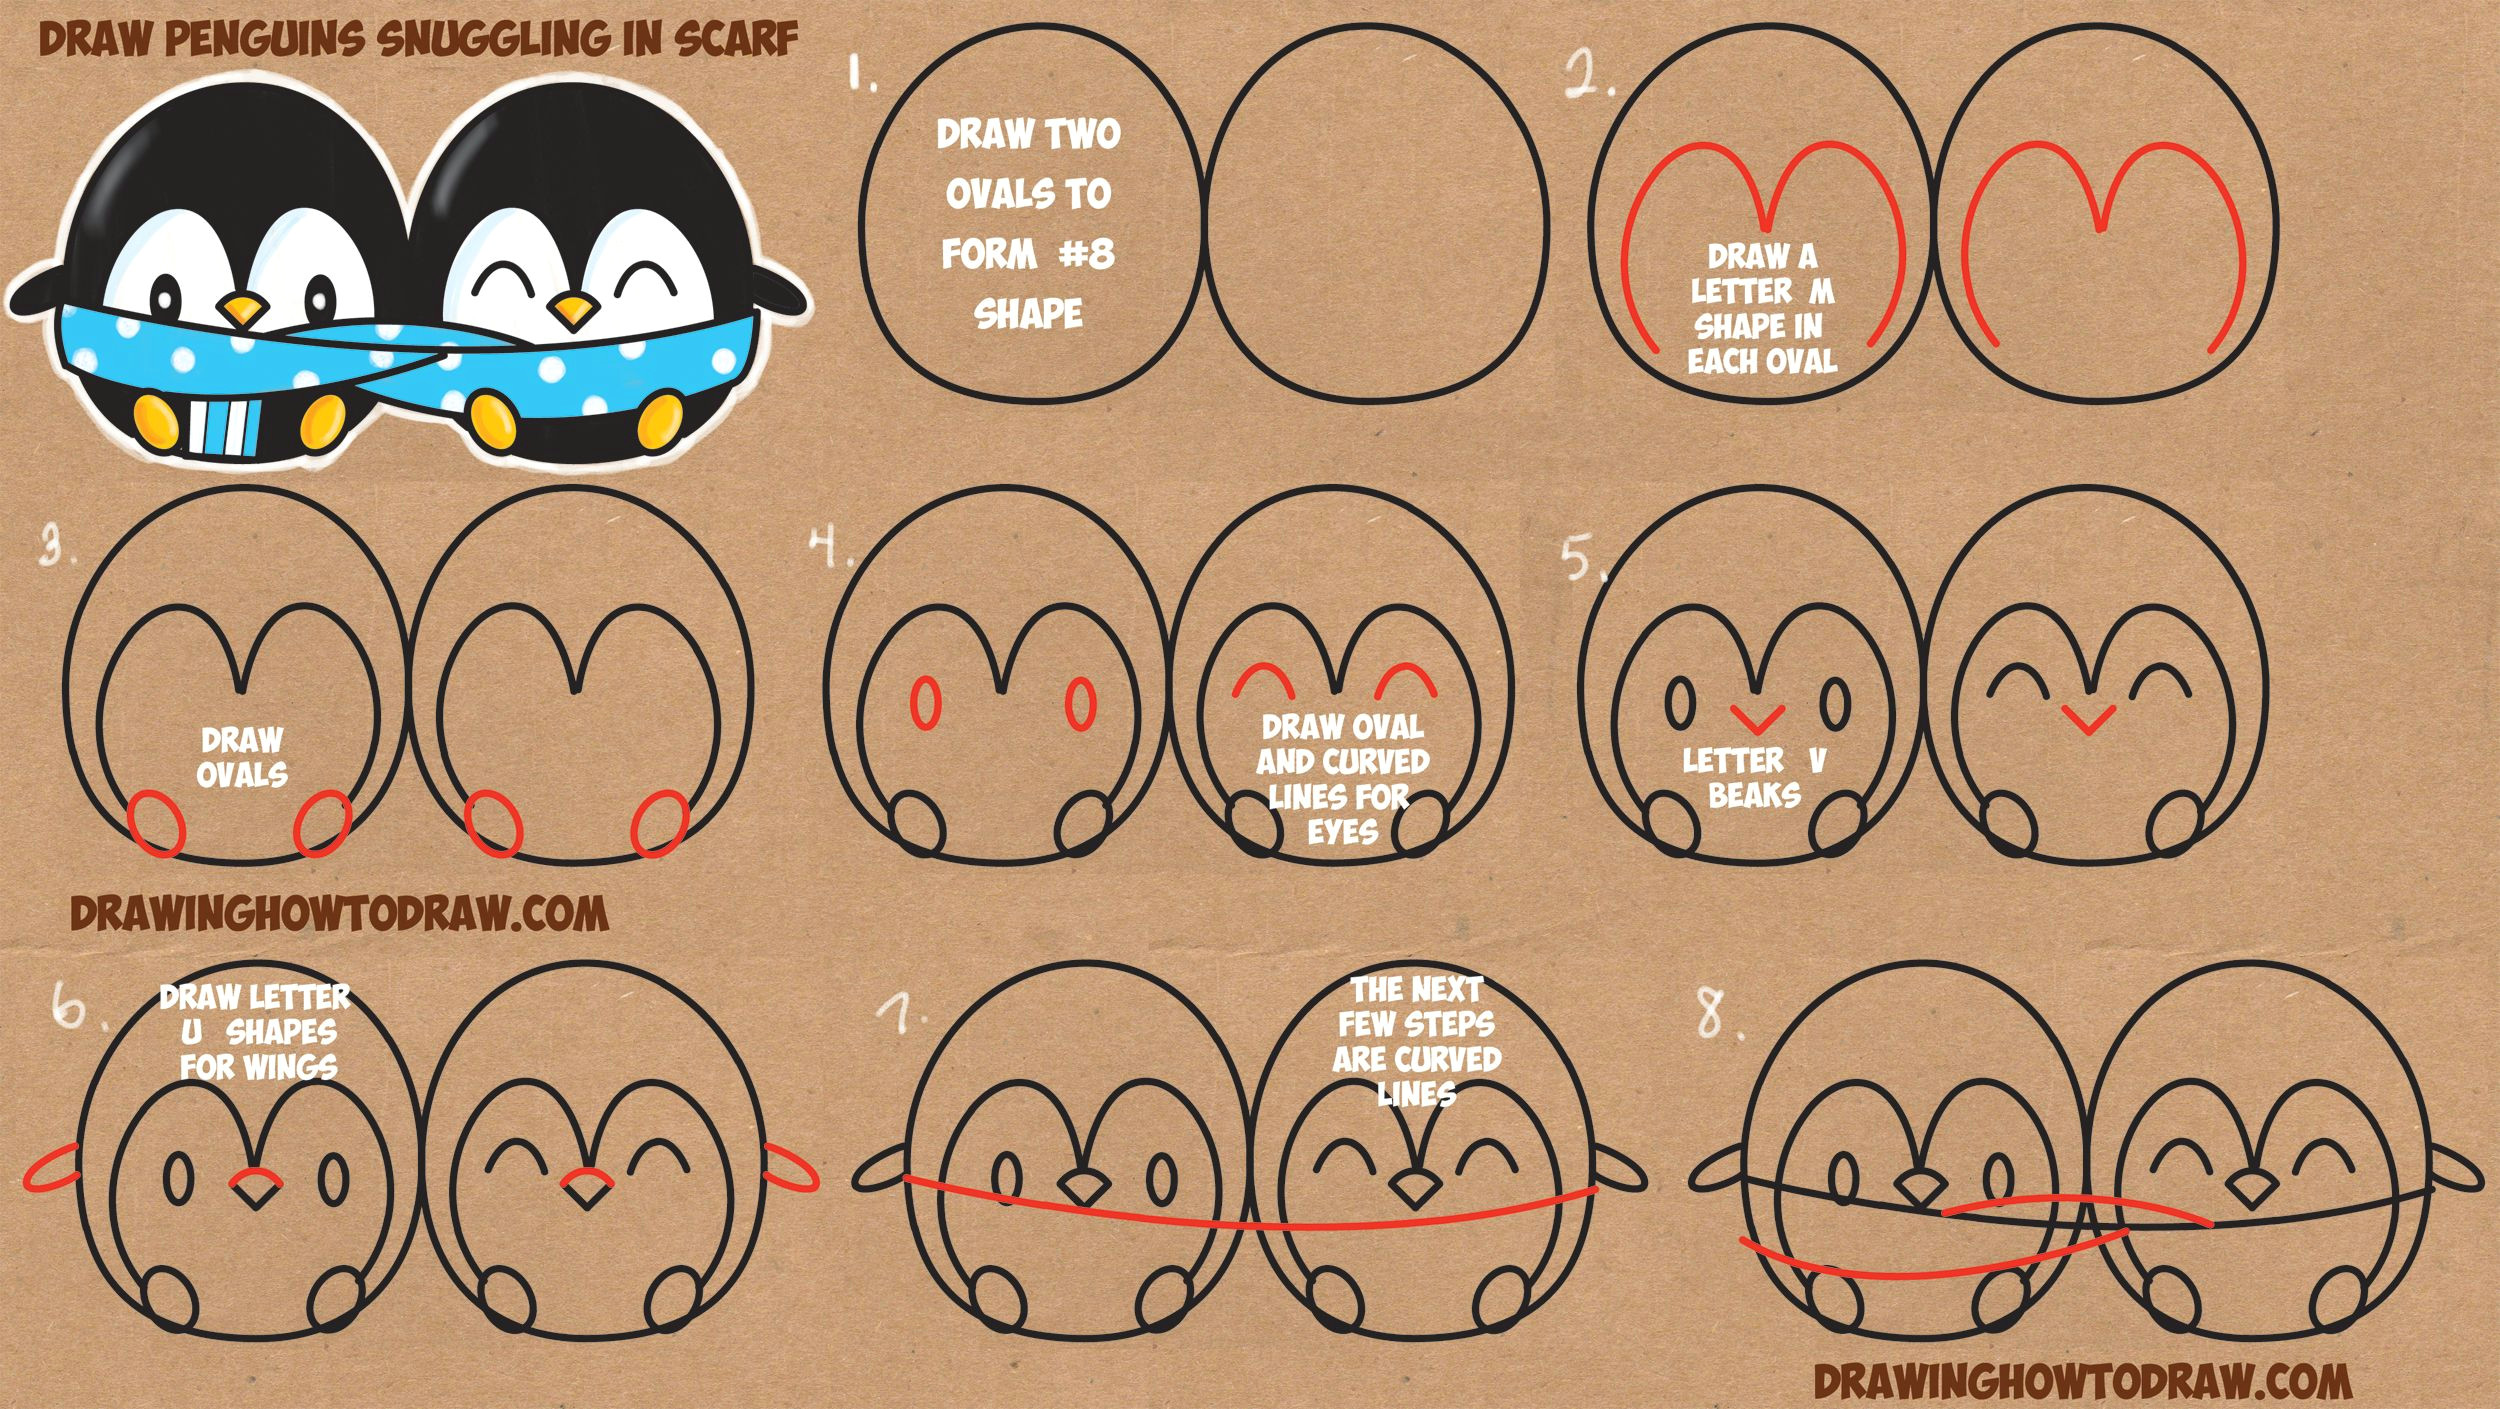 Drawing Cartoons 2 Tutorial How to Draw Cute Kawaii Chibi Cartoon Penguins In A Scarf for